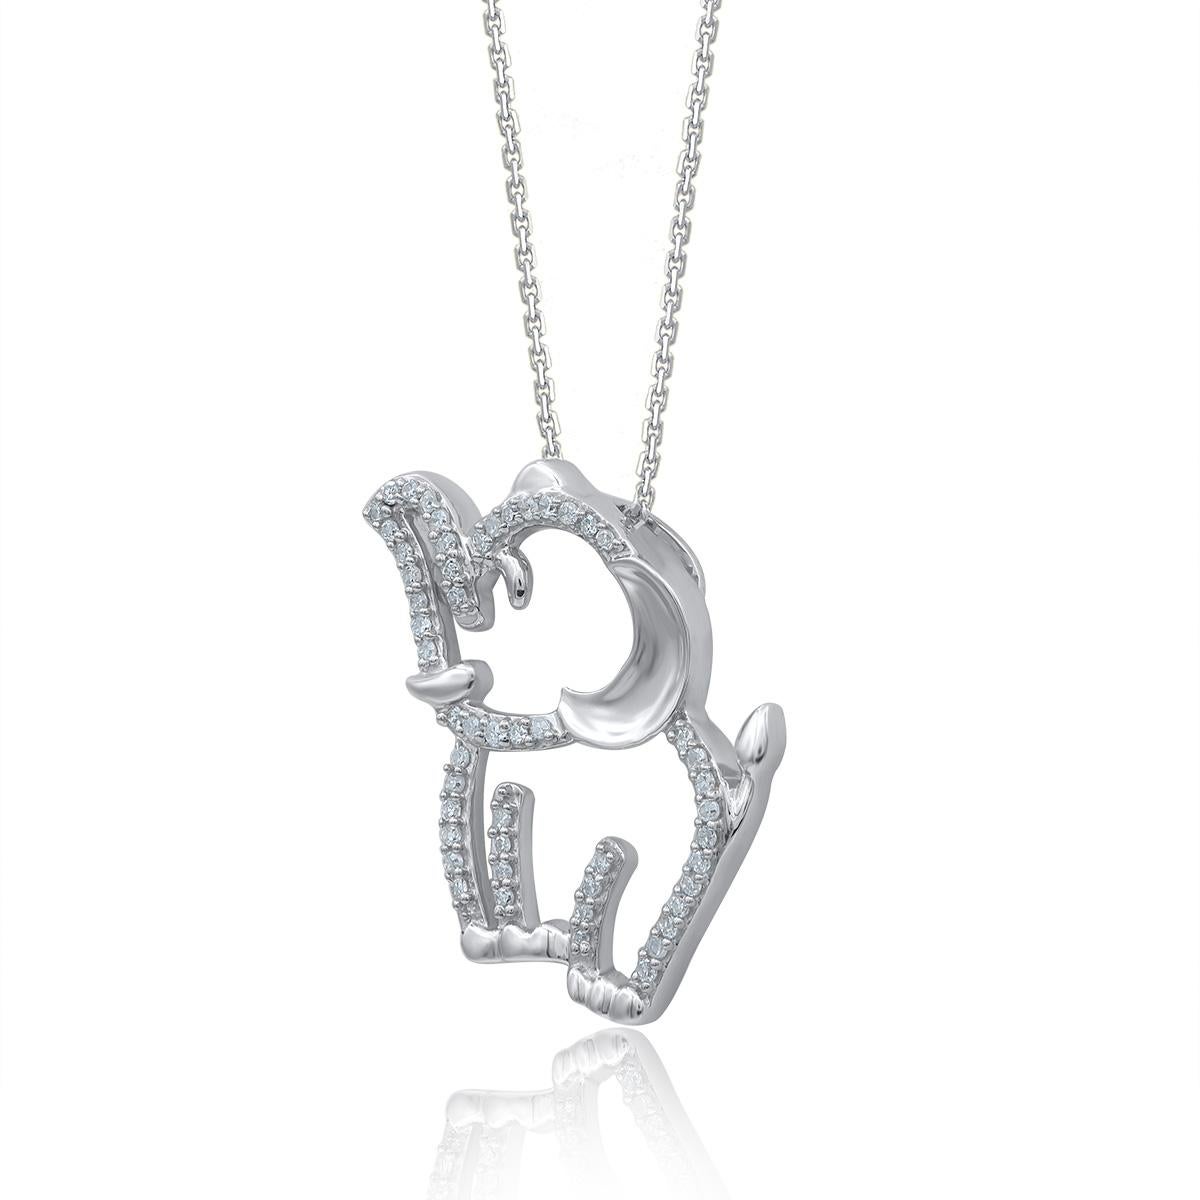 Designed to delight, this sparkling diamond elephant pendant is a whimsical choice. This pendant is crafted from 14-karat white gold and features 52 single cut diamonds set in pave setting. H-I color I2 clarity and a high polish finish complete the